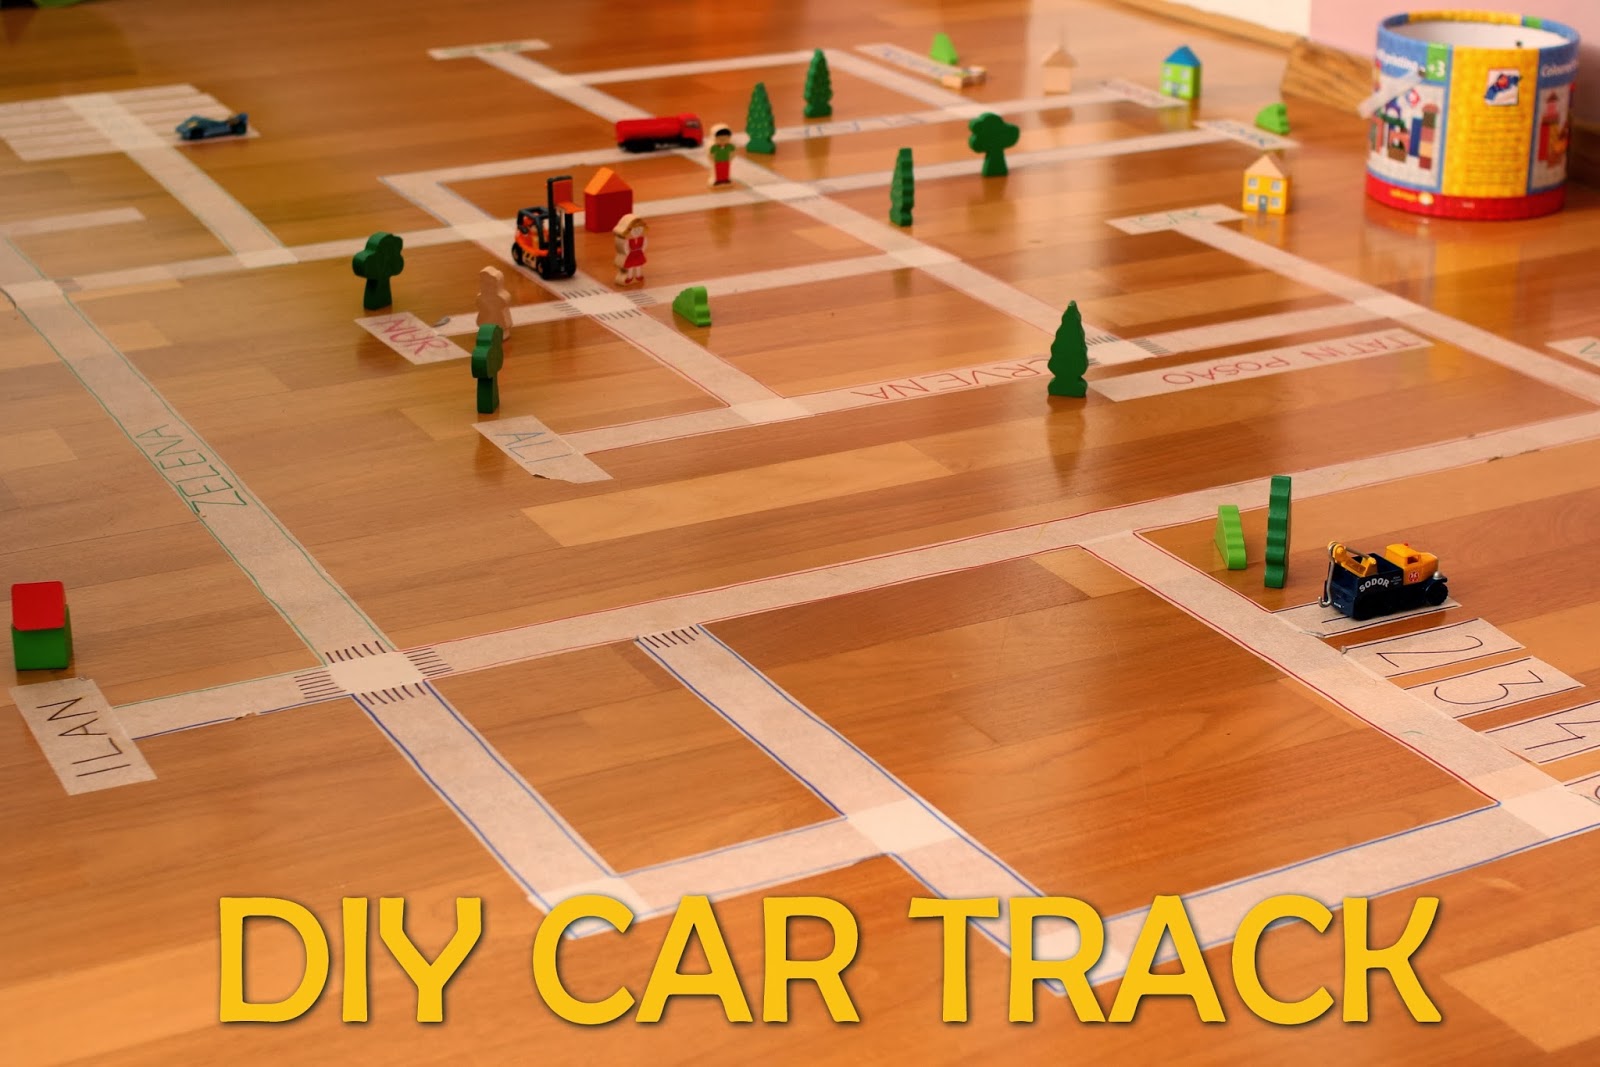 DIY Duct Tape Race Tracks {Boredom Buster}